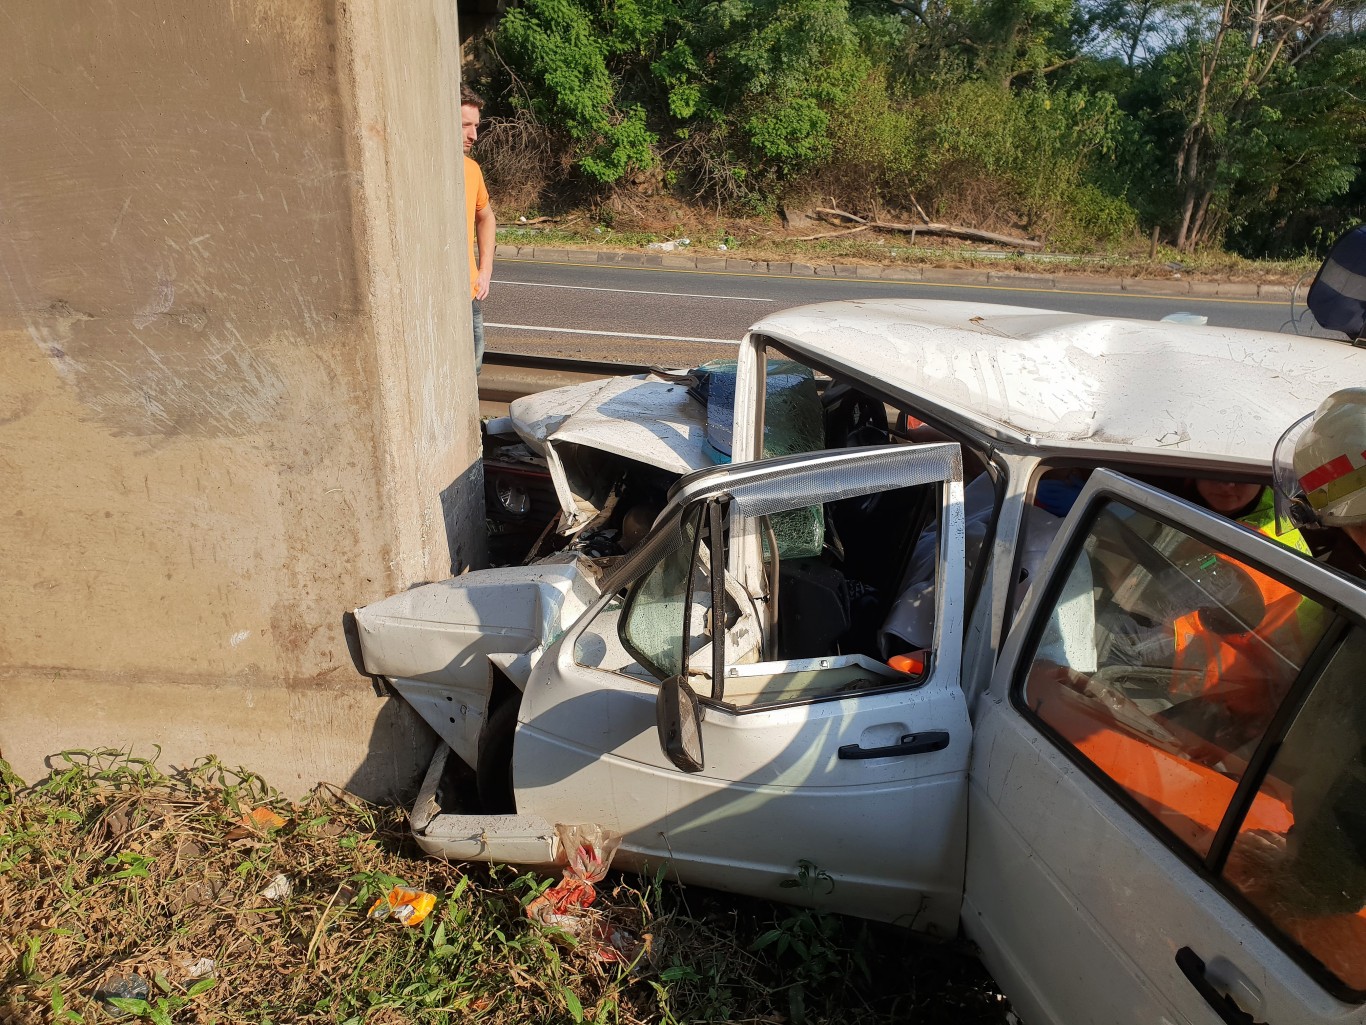 A Man entrapped in wreckage on the M7 of Hans Detman Highway in Northdene